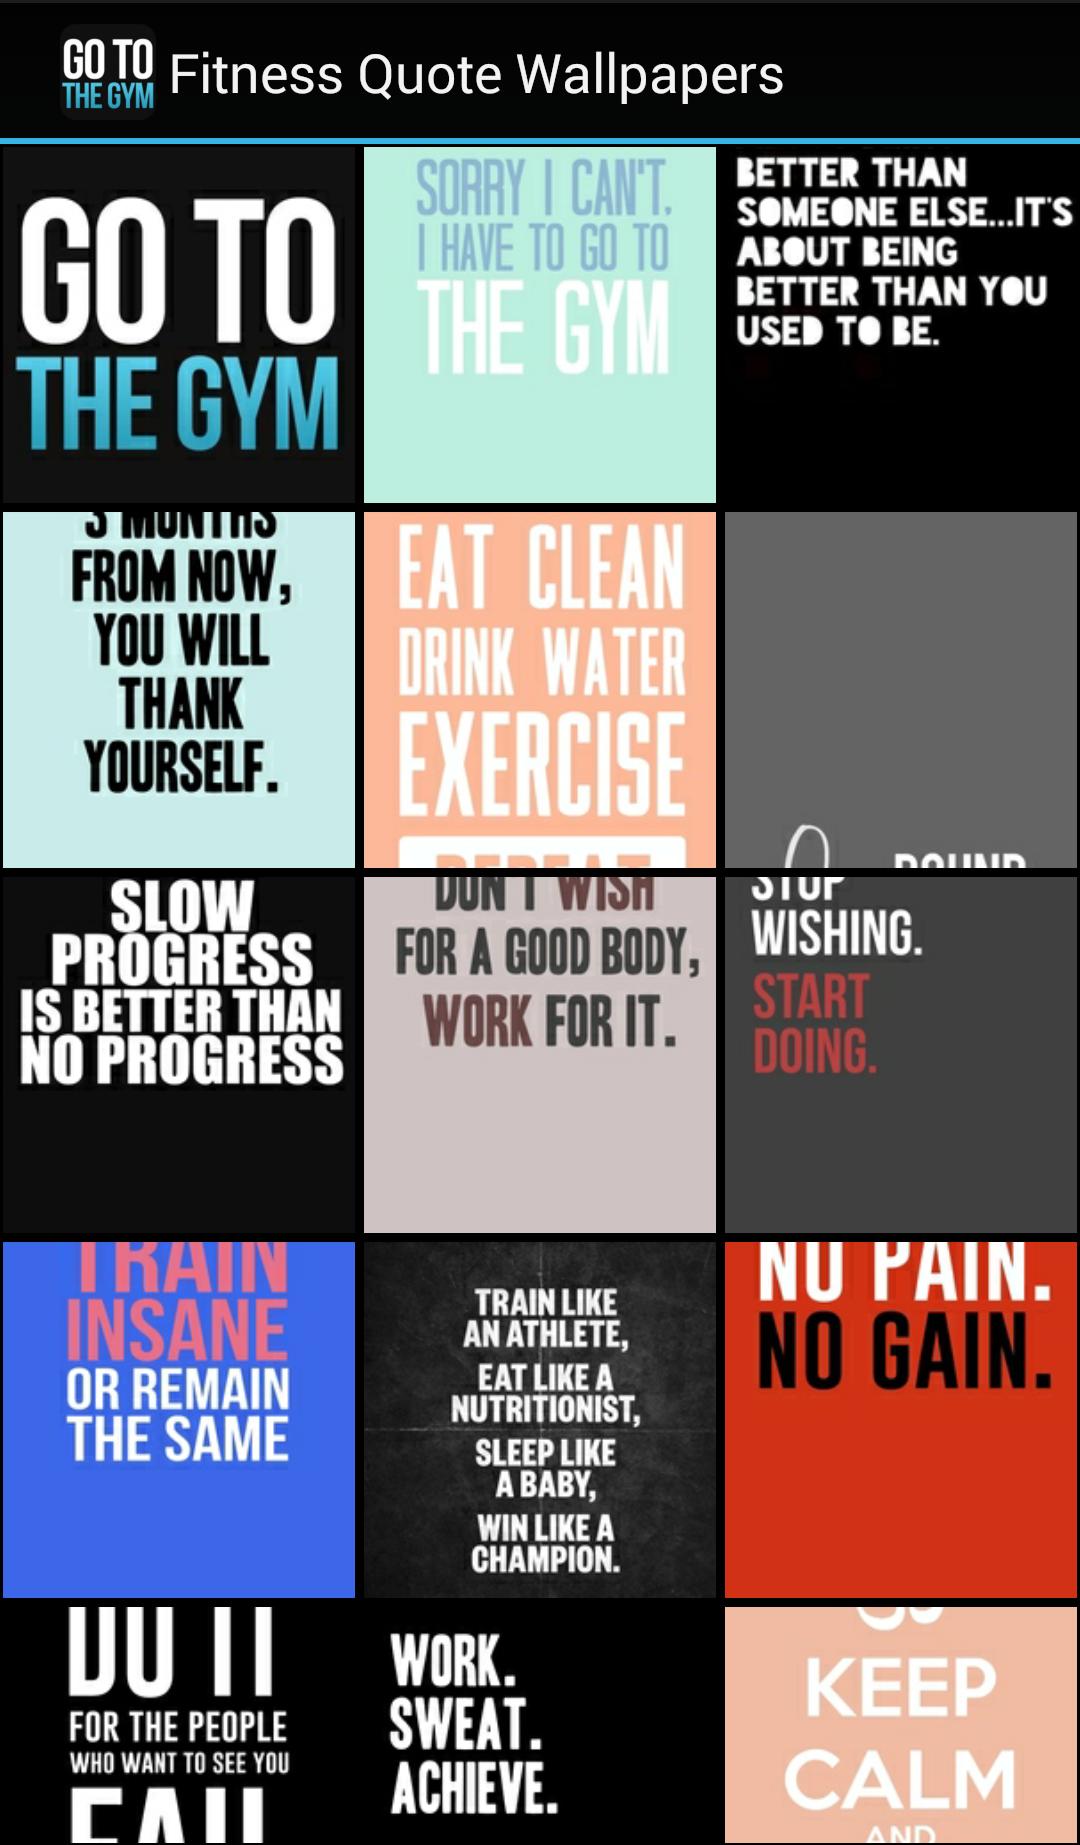 Fitness Quote Wallpapers for Android - APK Download